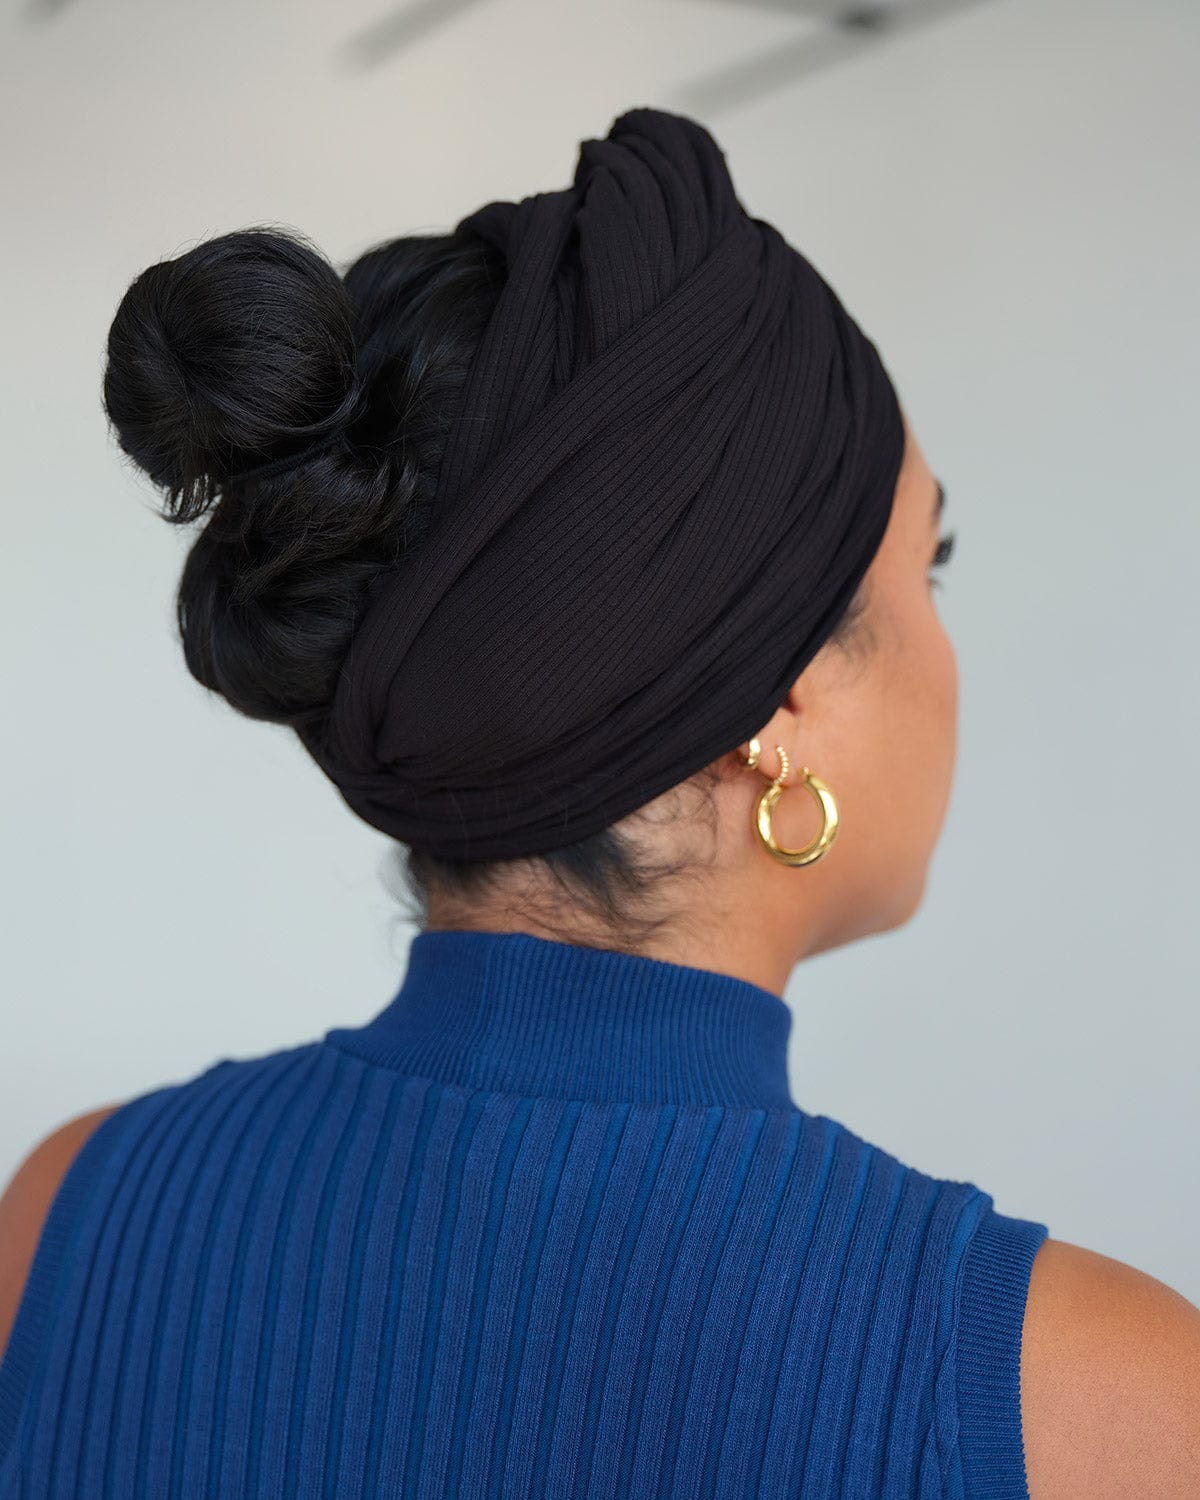 The Wrap Life Ribbed Head Wrap in Jet Black Black Head Wrap